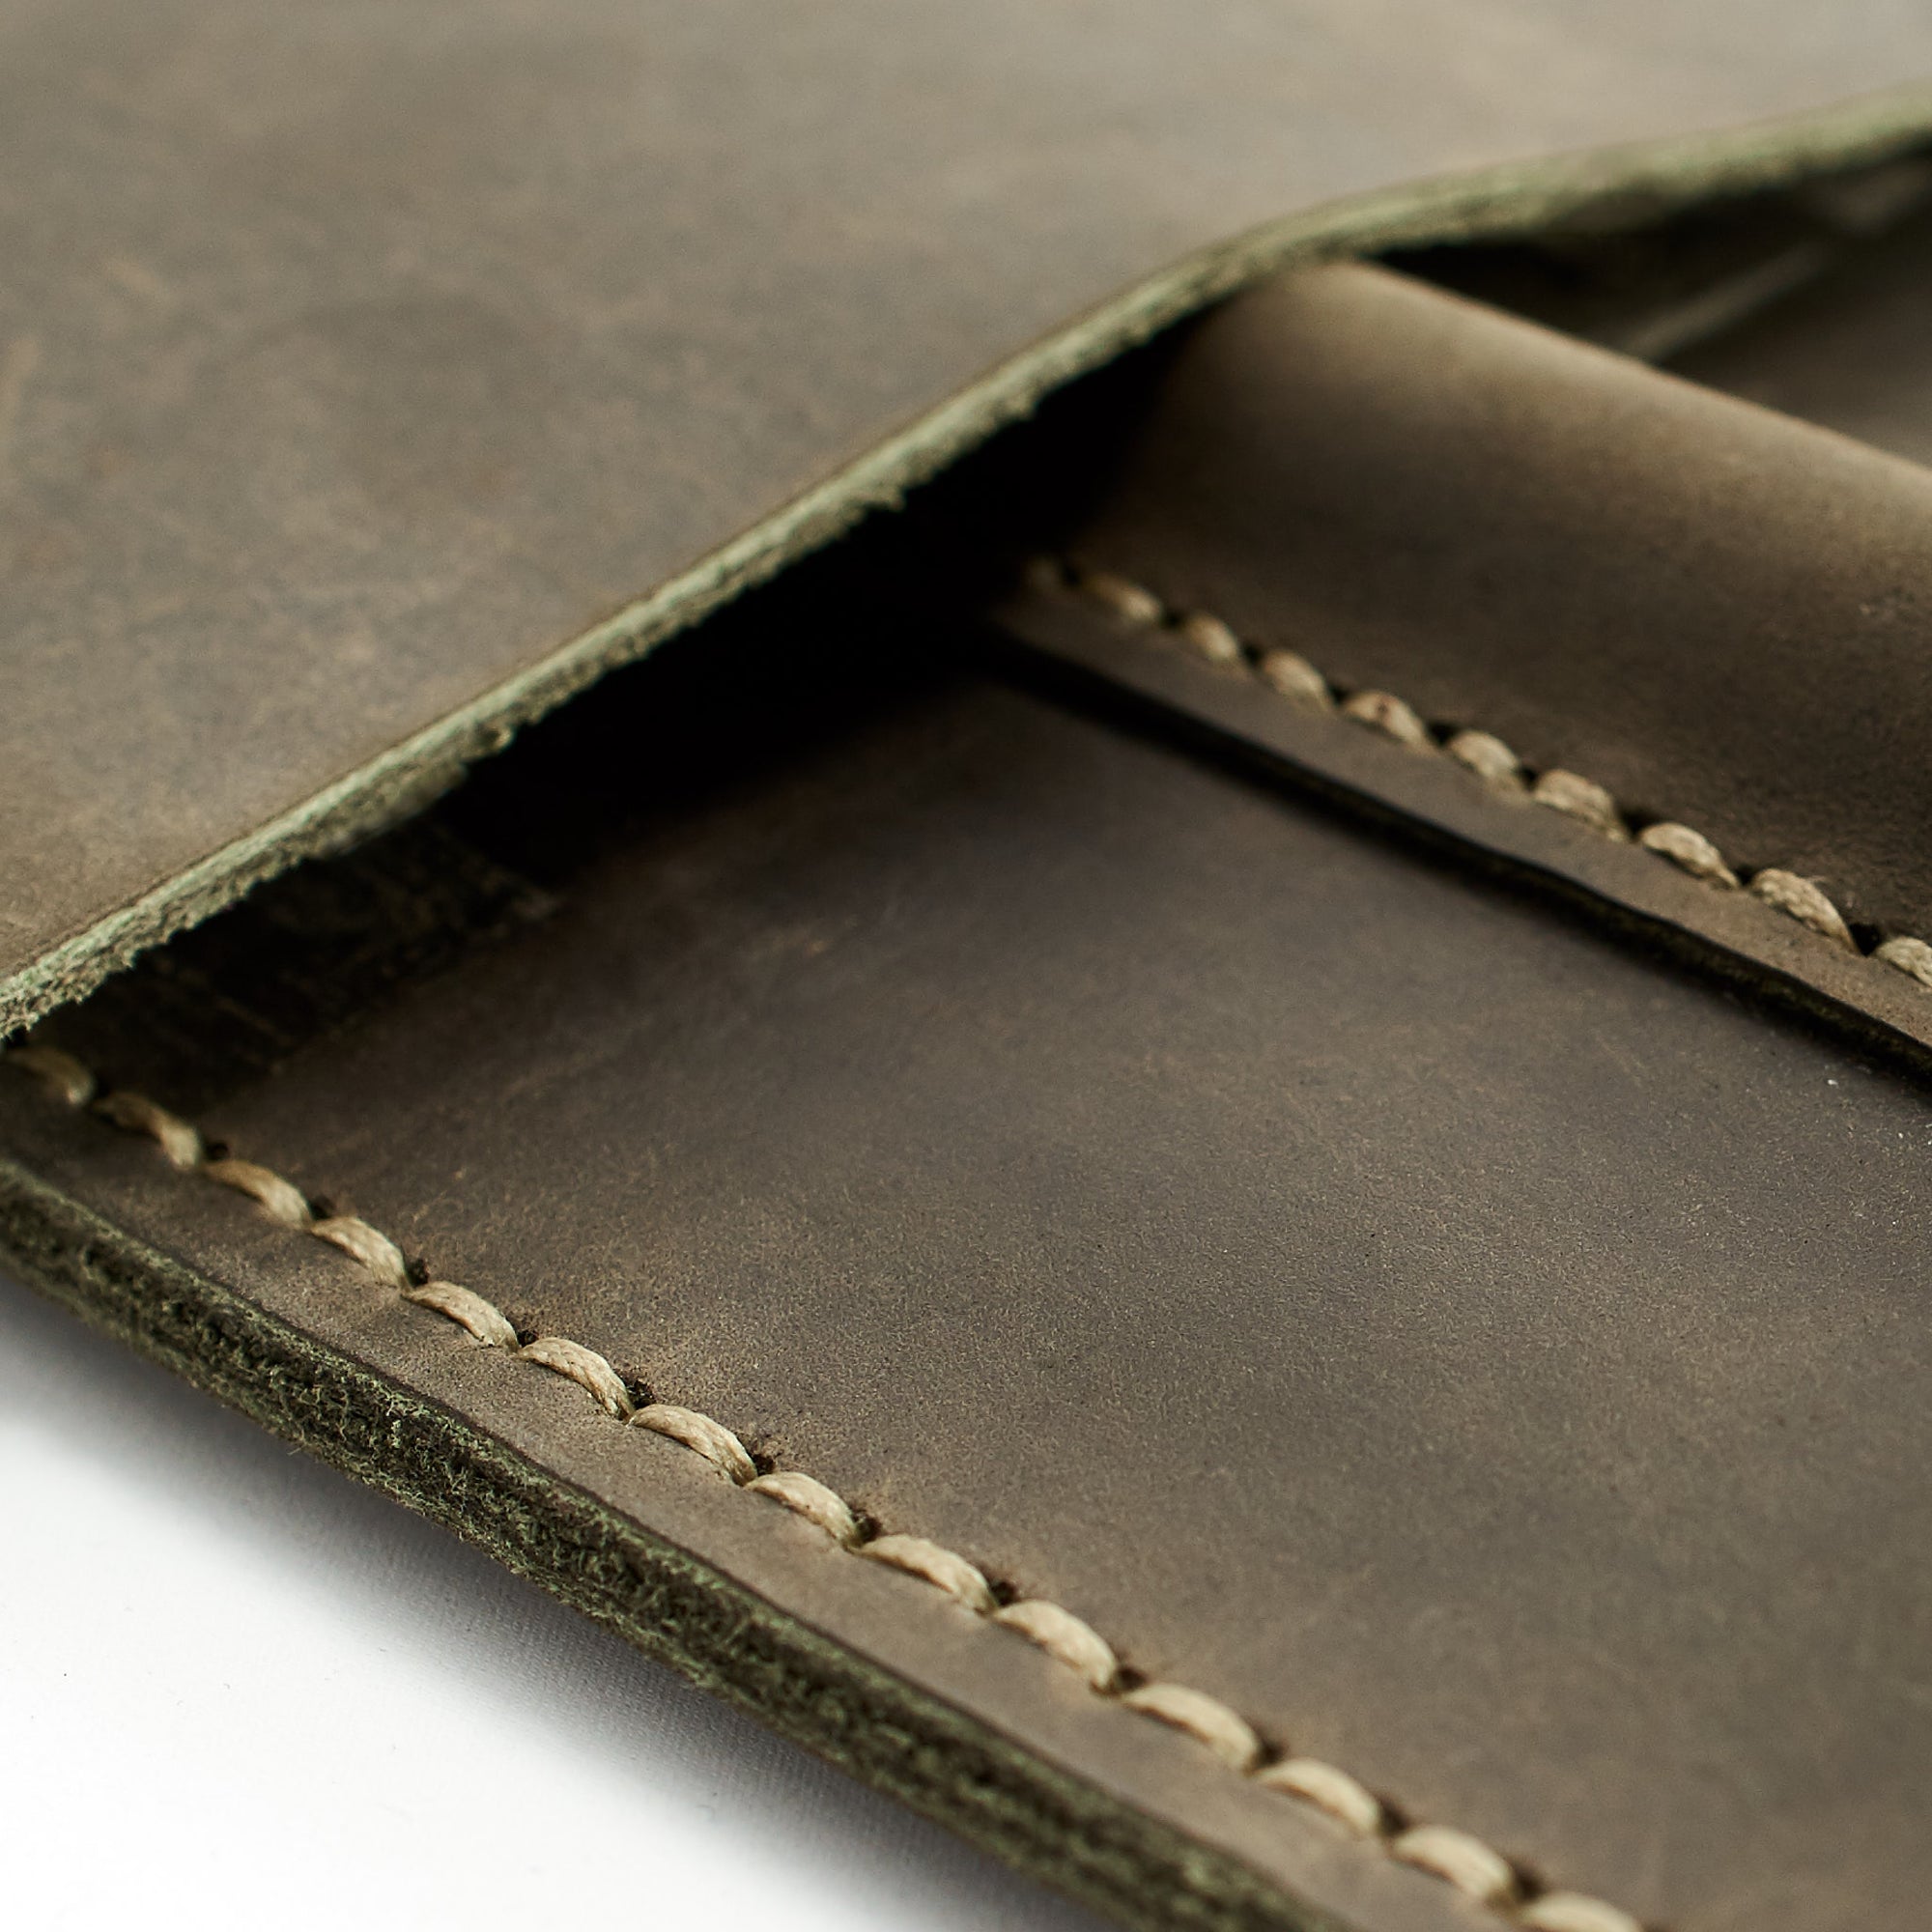 Hand Stitching. iPad Sleeve. iPad Leather Case Green With Apple Pencil Holder by Capra Leather